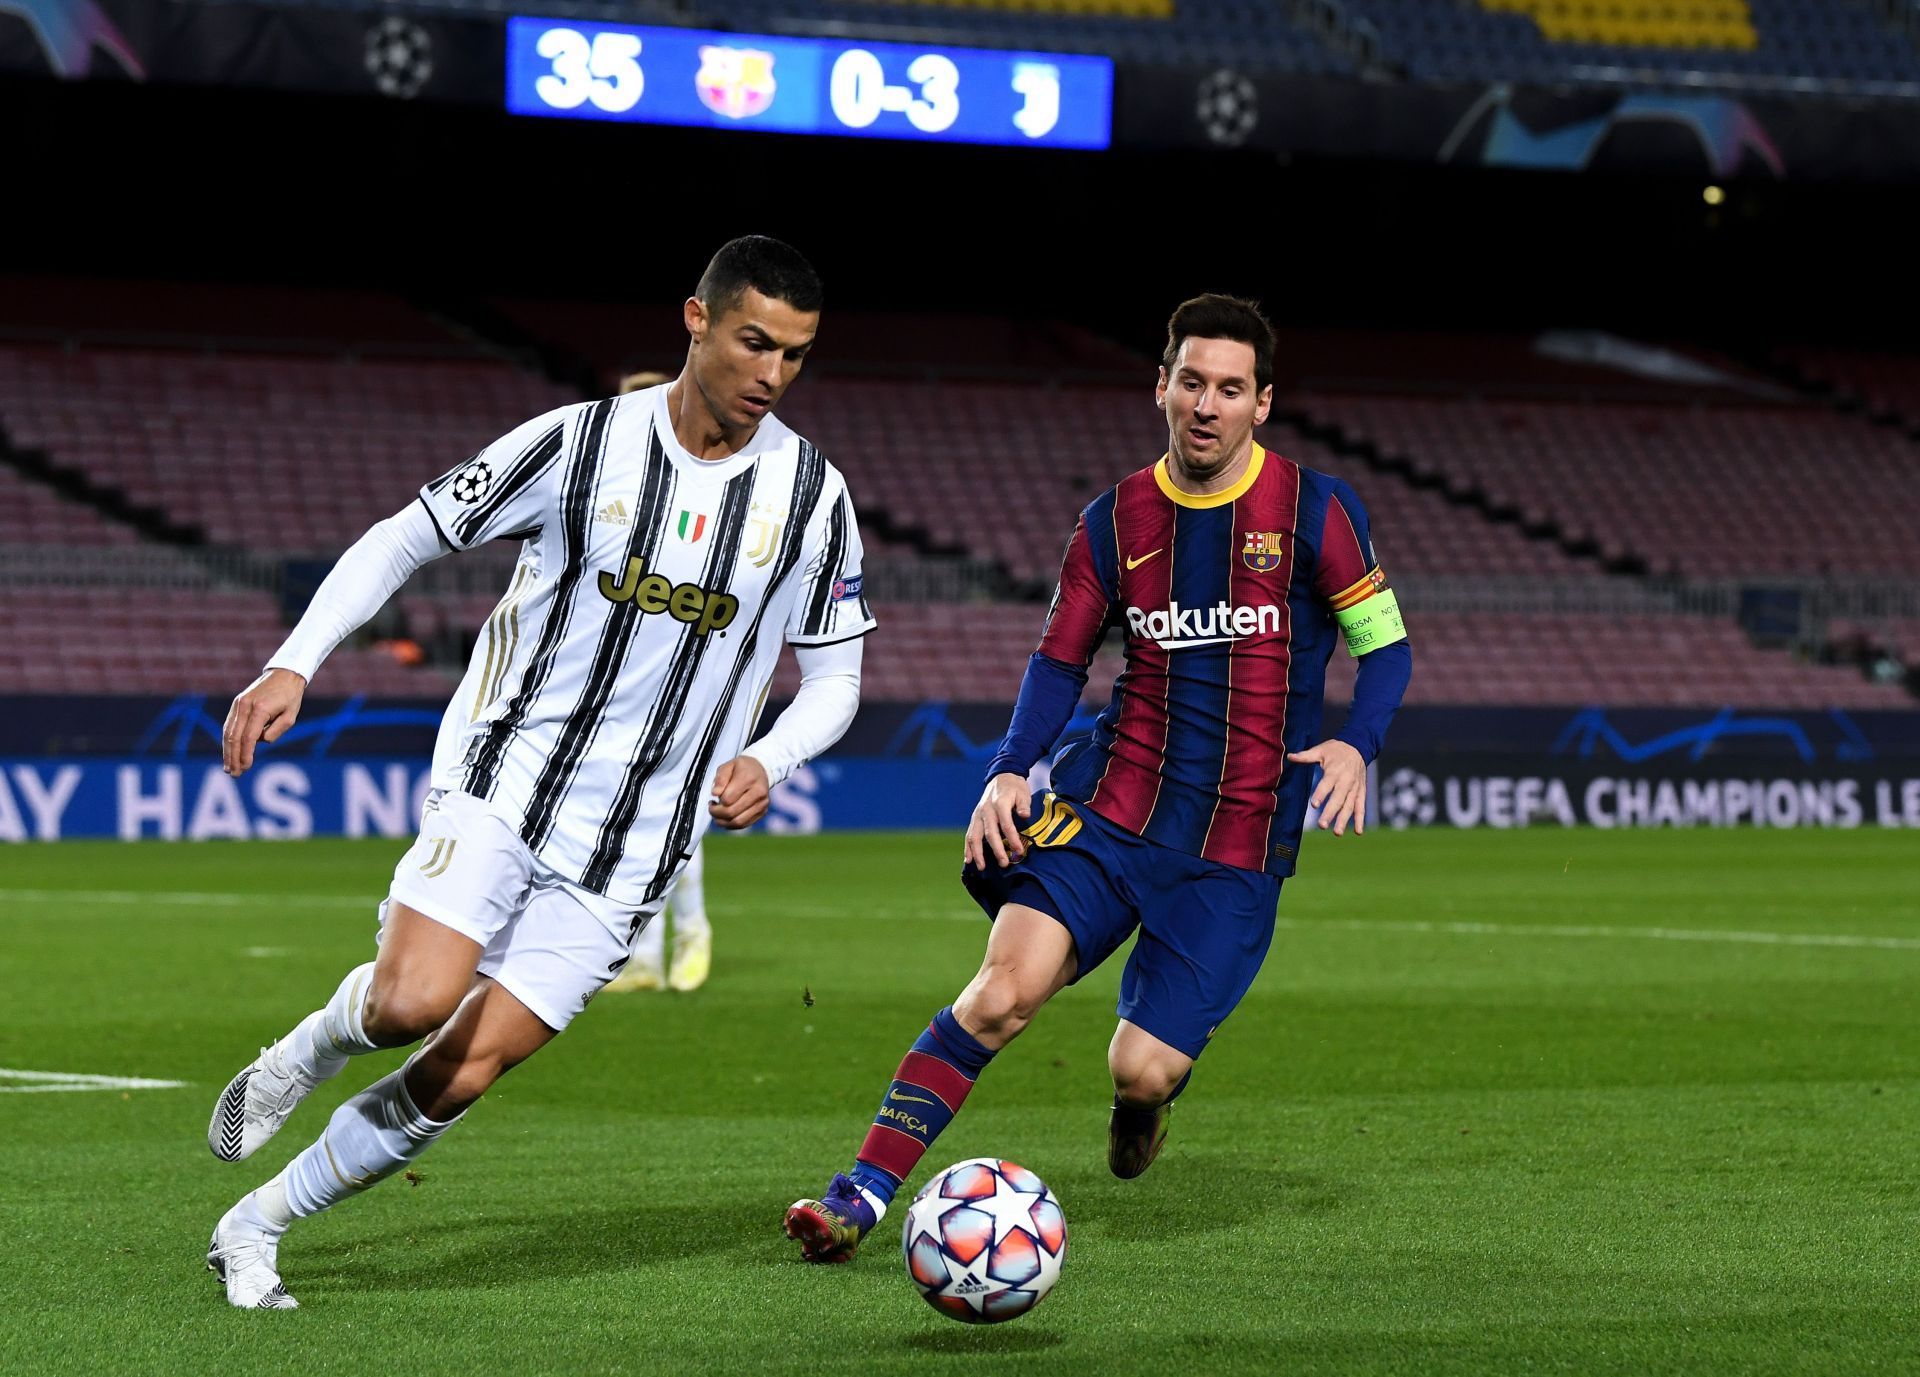 Cristiano Ronaldo (left) and Lionel Messi have scored many league goals after turning 30.